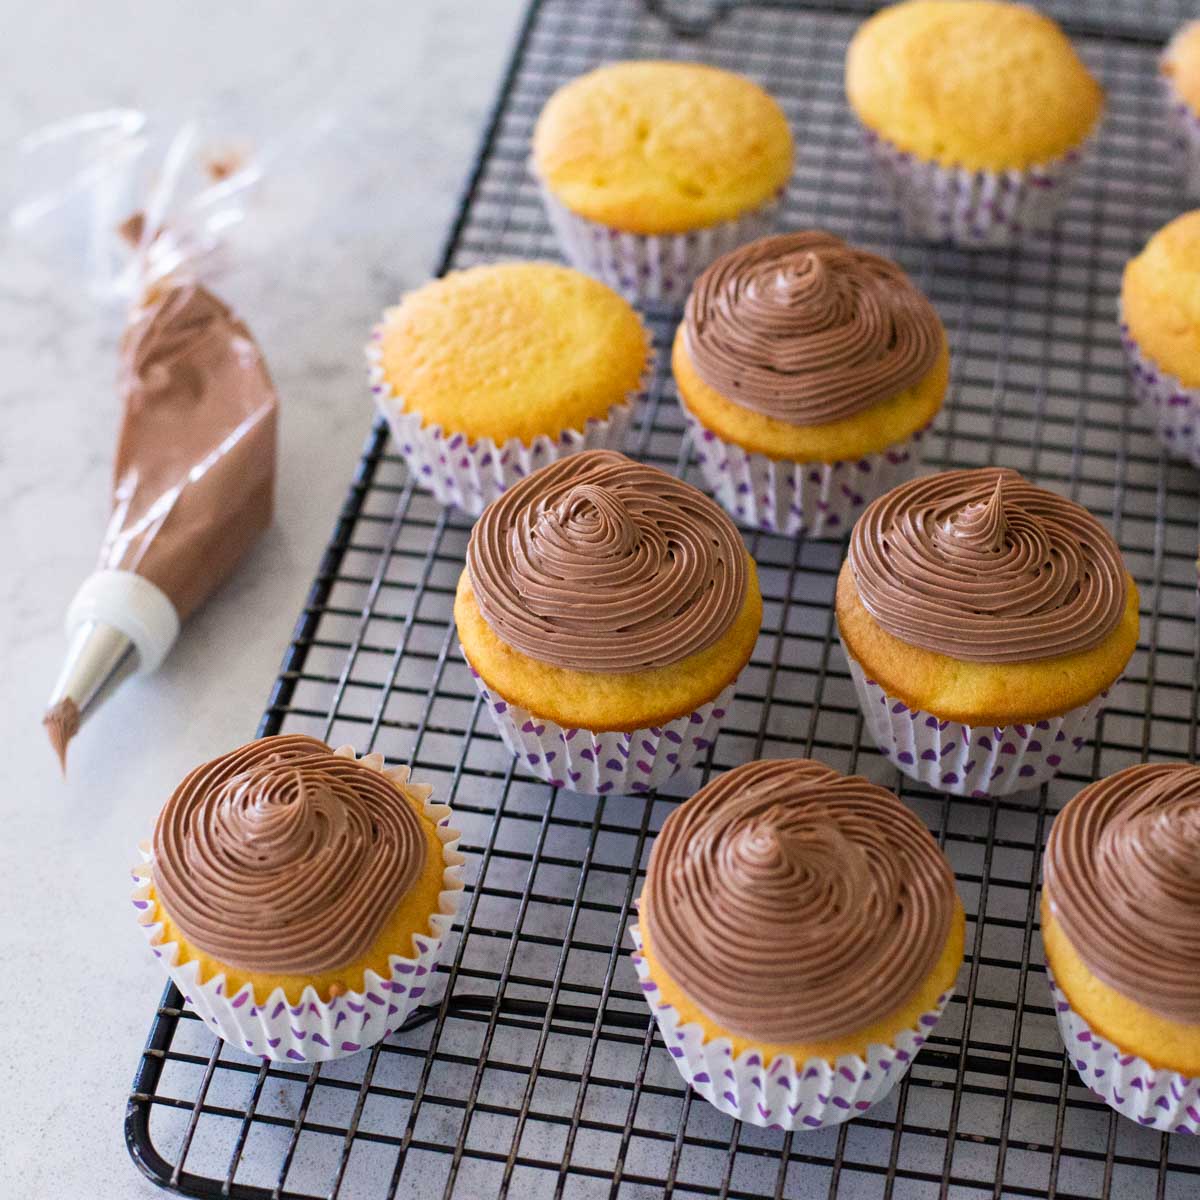 Cupcakes topped with a swirl of chocolate cream cheese frosting sit on a baker's rack next to a piping bag filled with frosting.